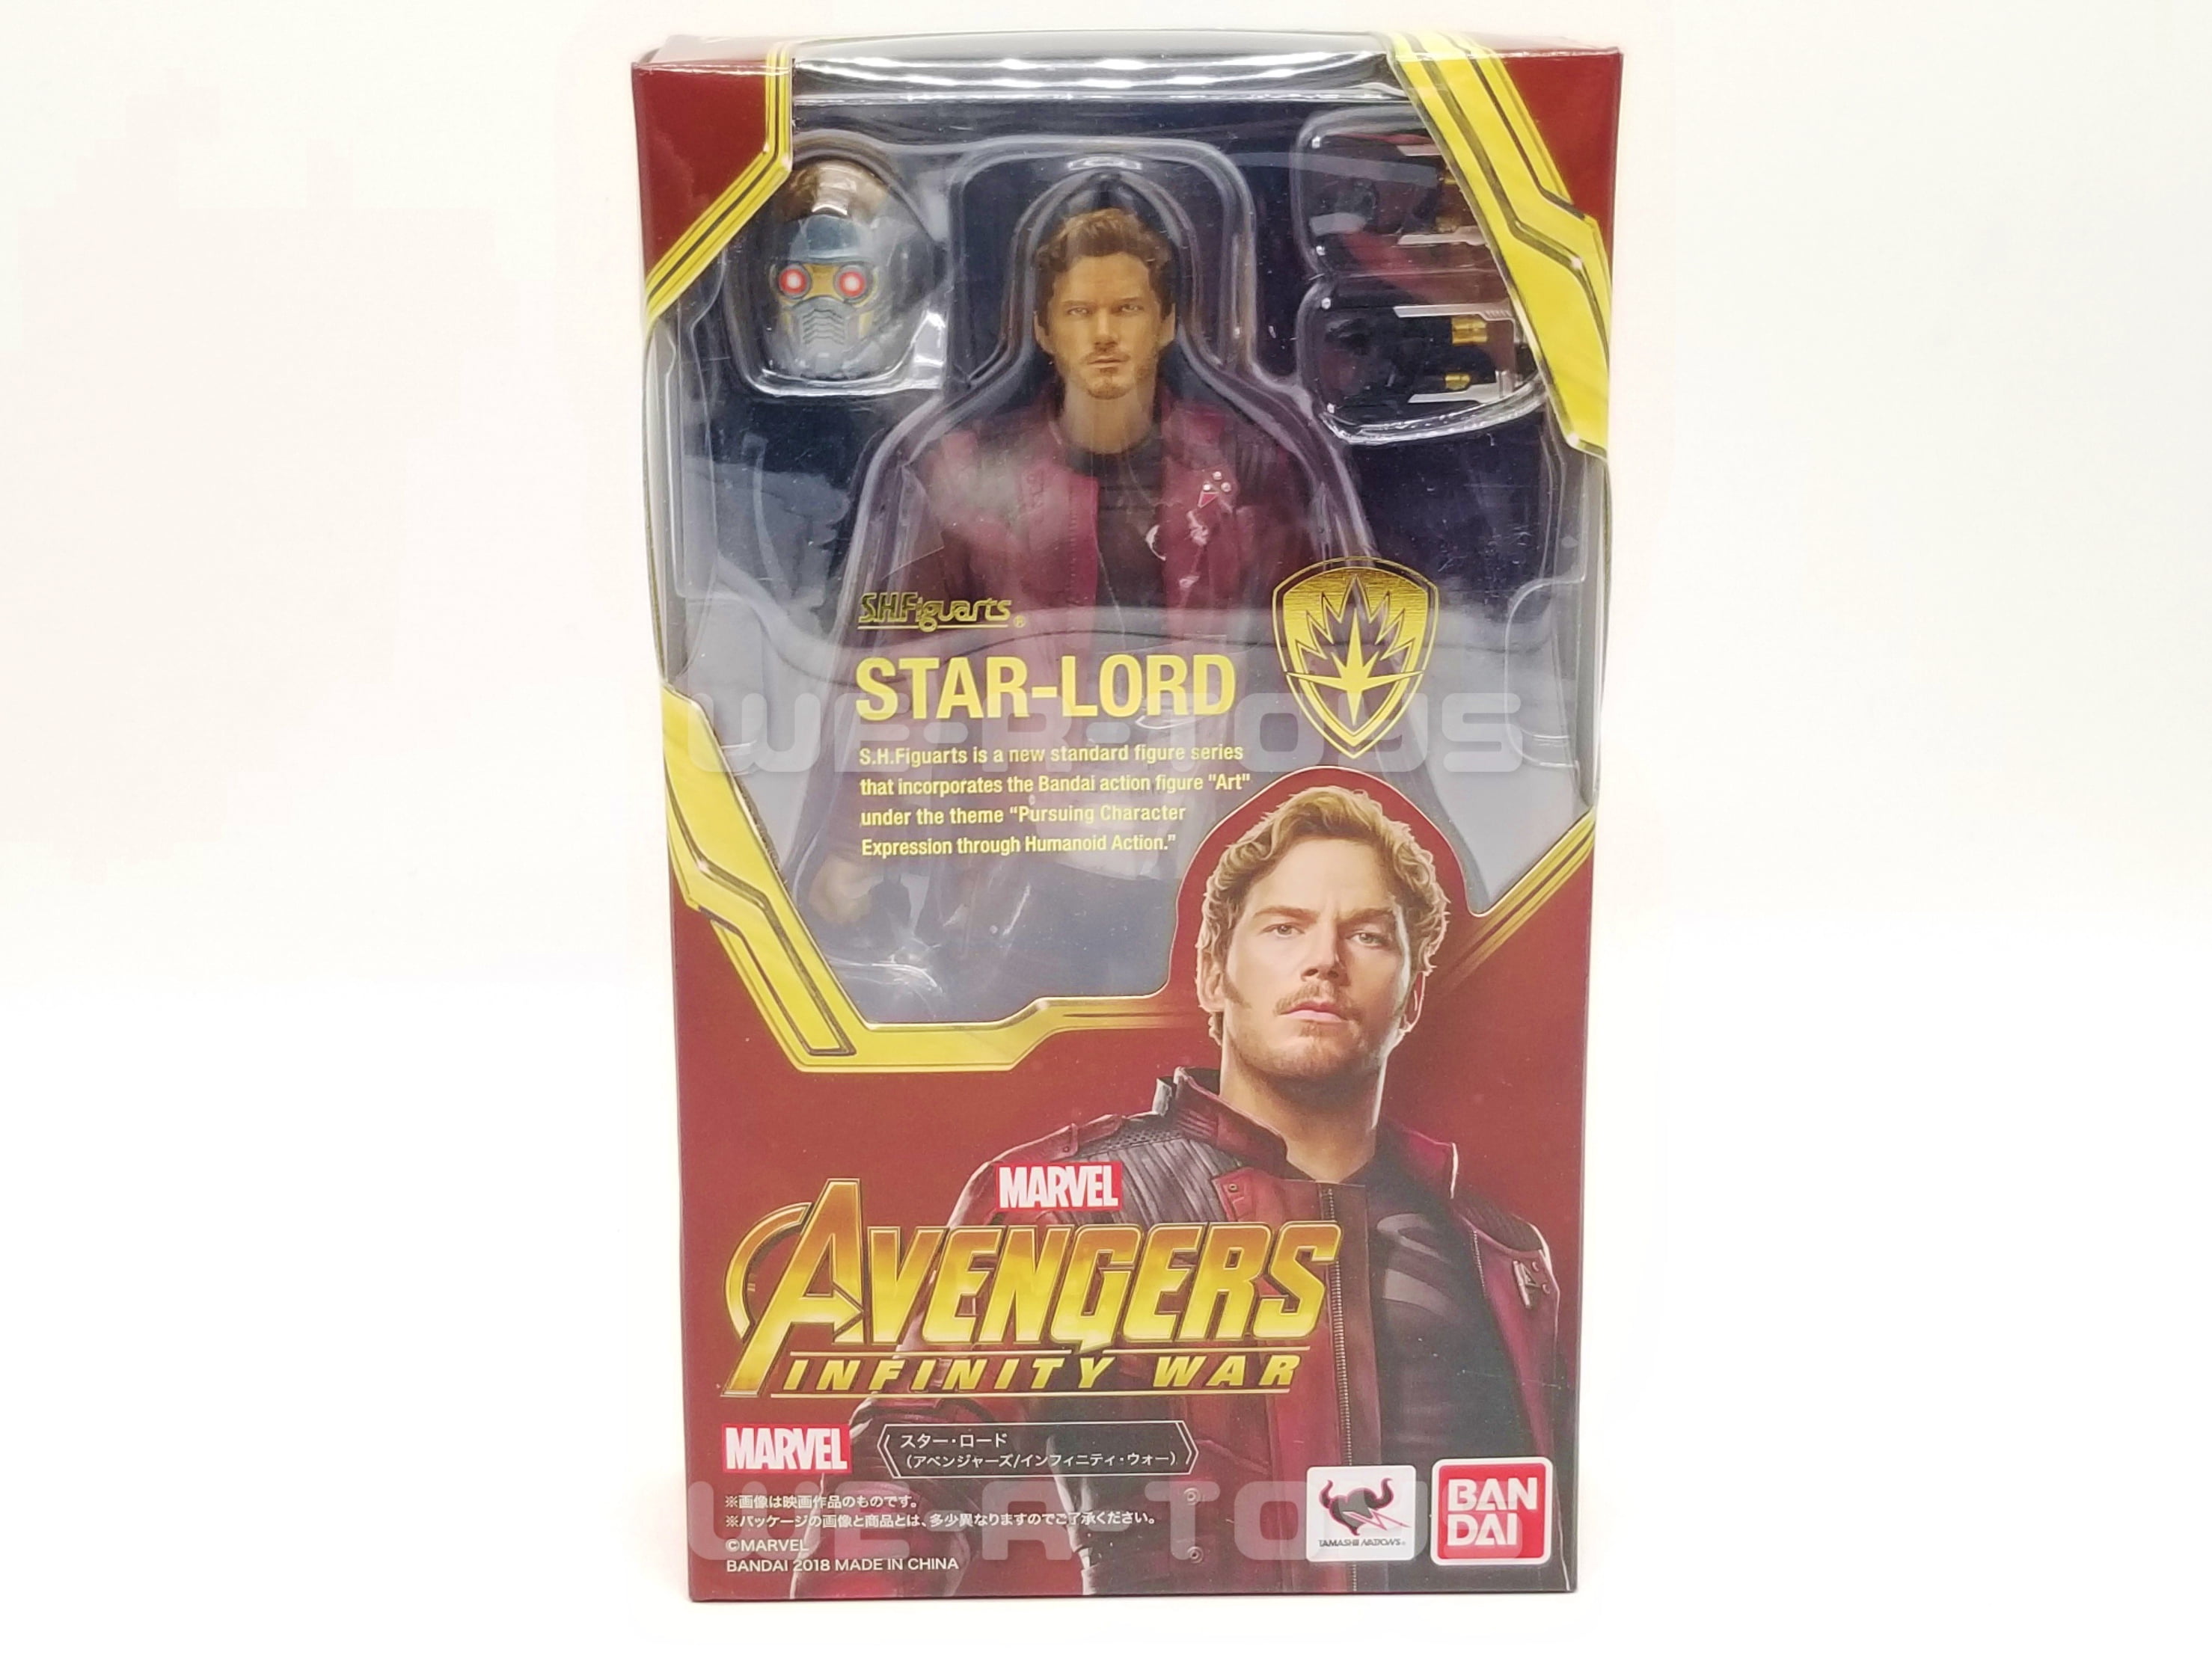 Marvel Avengers Infinity War Star-Lord S.H.Figuarts BanDai 2018 Action  Figure